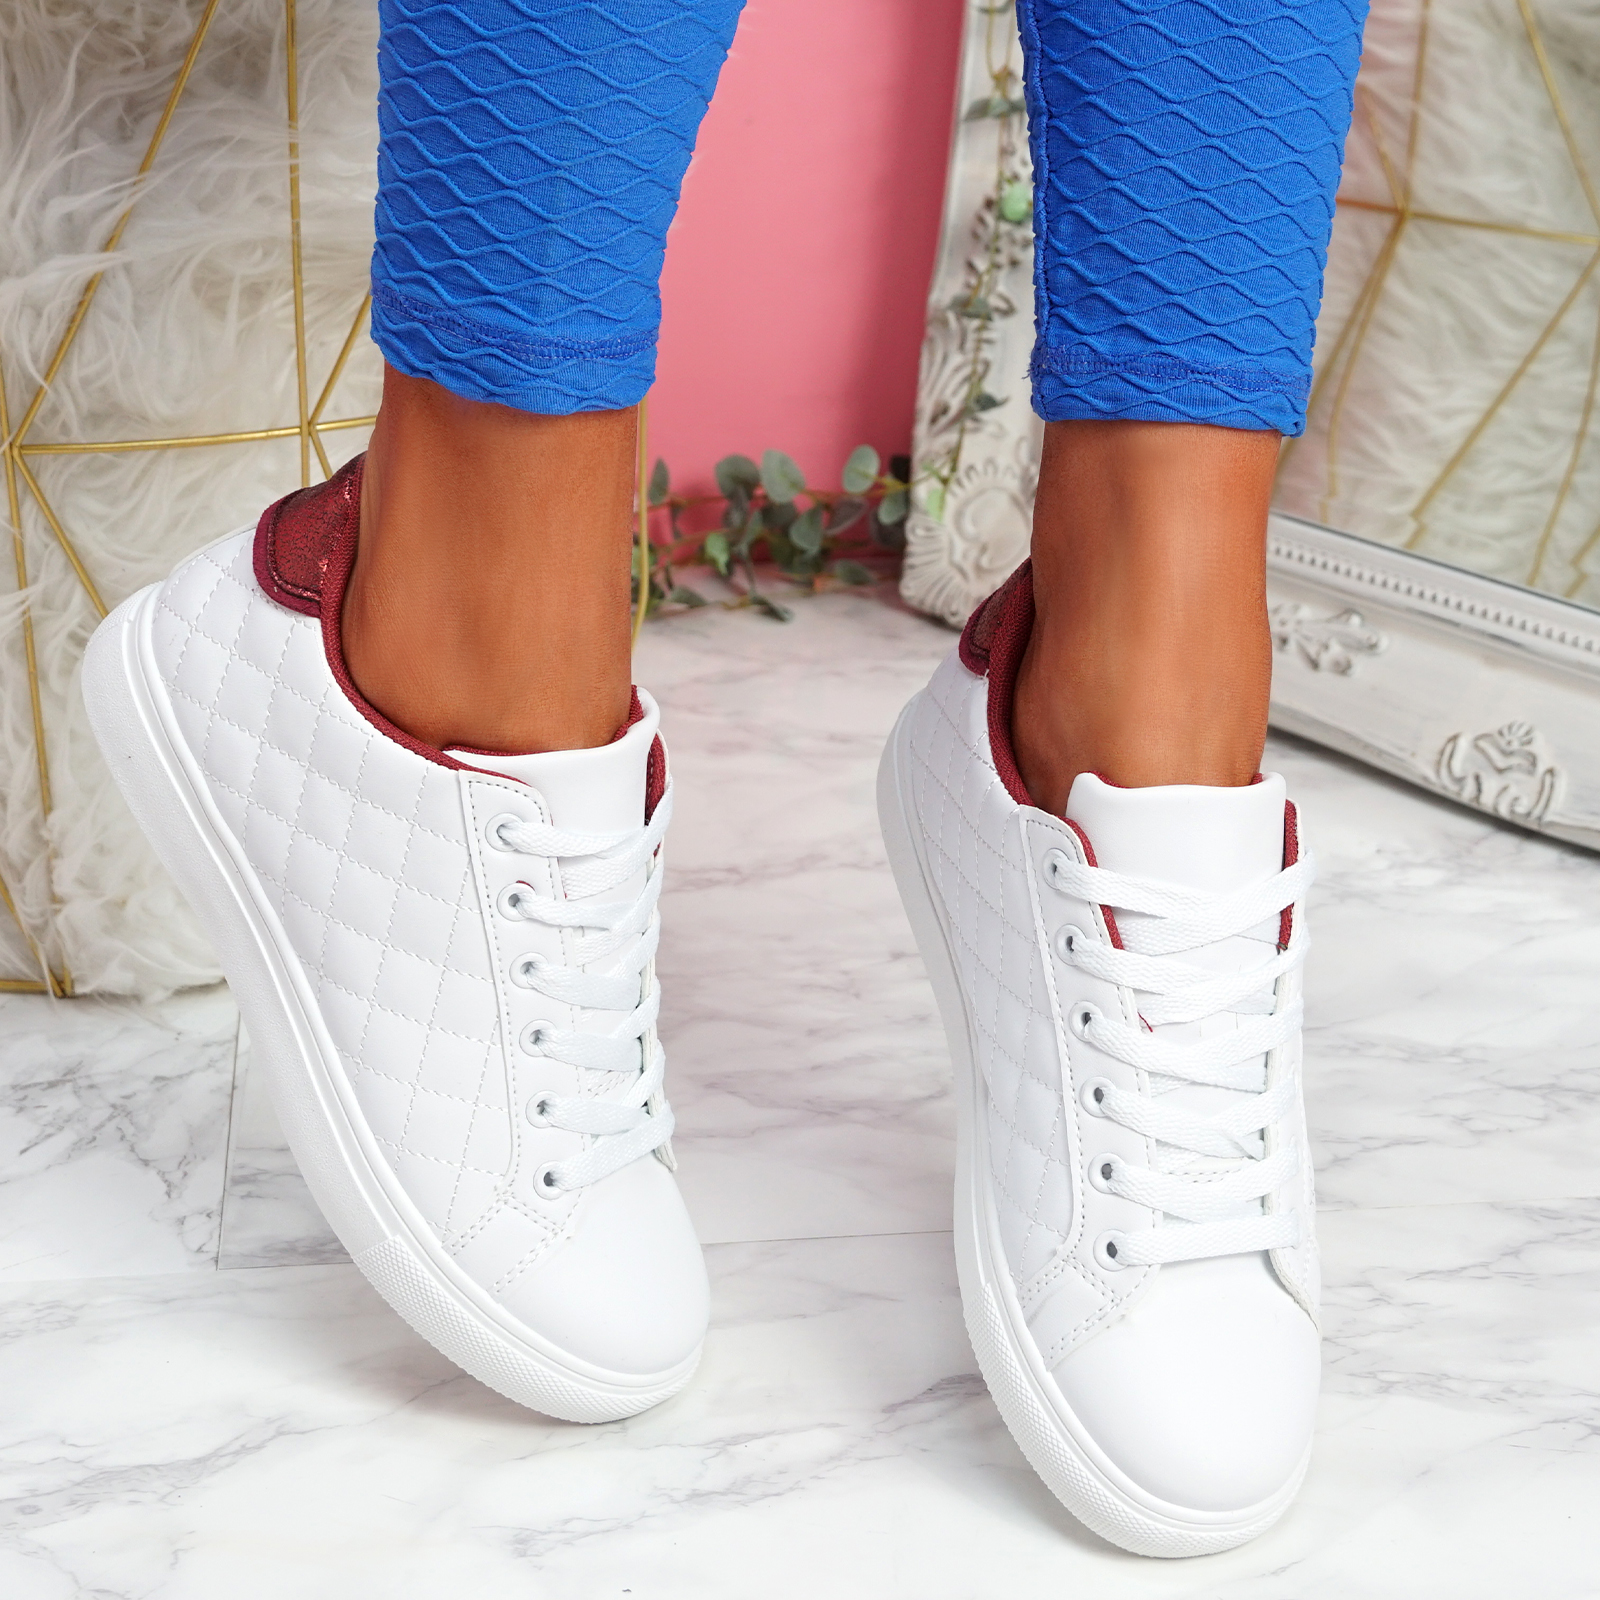 WOMENS LADIES LACE UP TRAINERS COMFY SNEAKERS PLIMSOLLS WOMEN SHOES SIZE UK 3-8